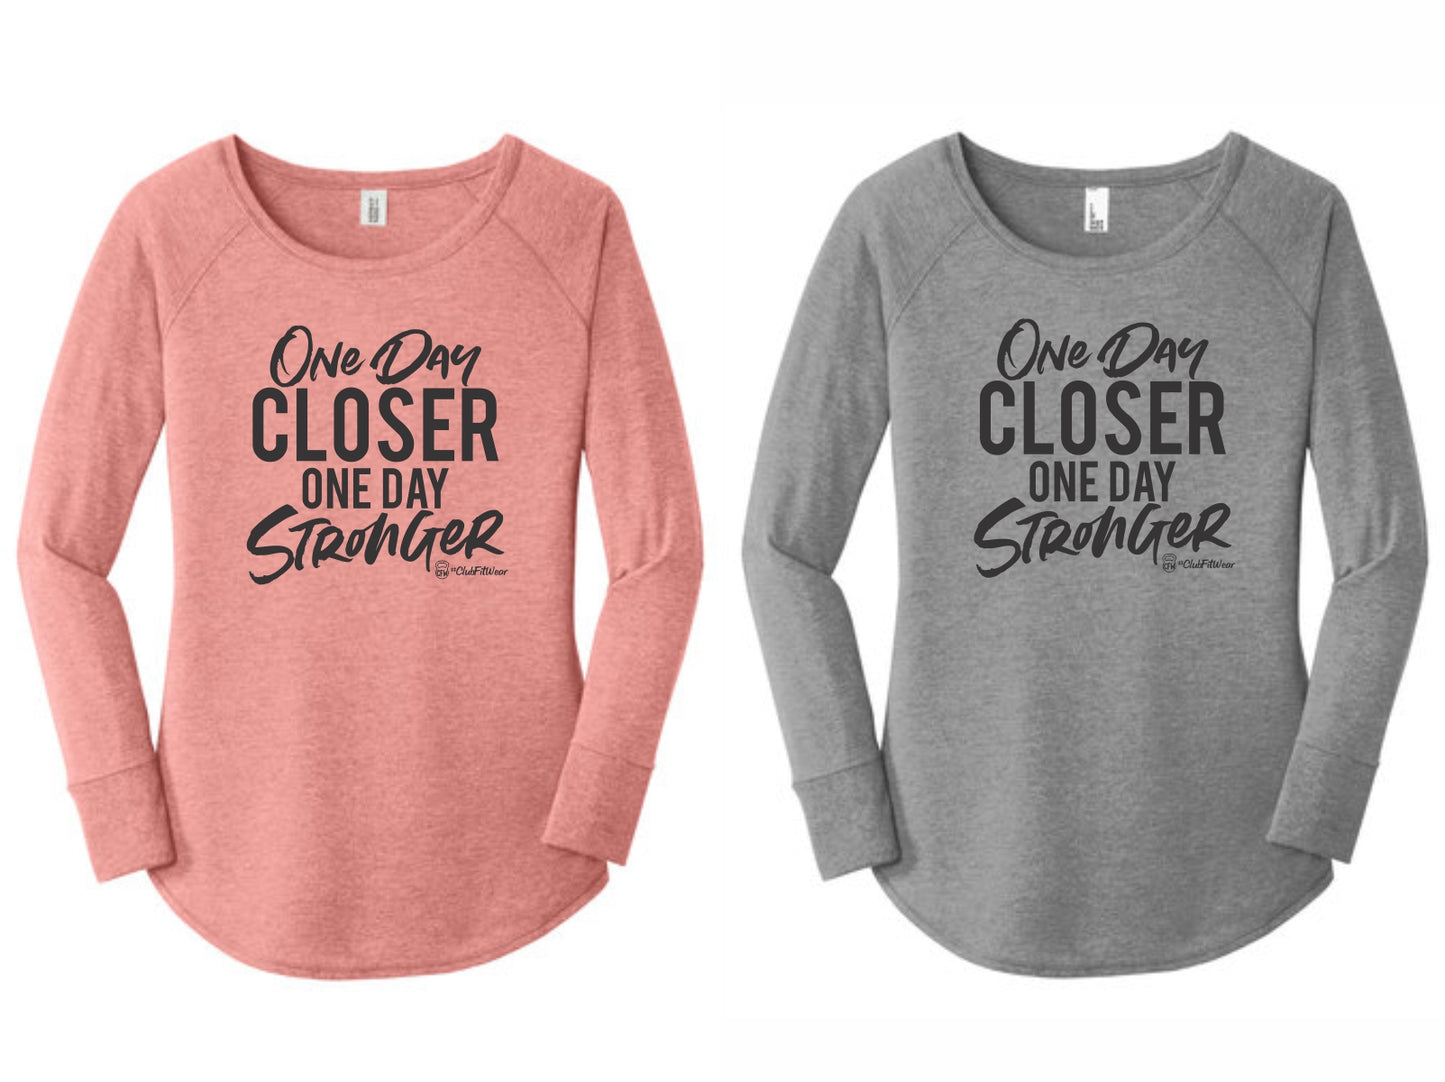 One Day Closer One Day Stronger - Long Sleeve Tunic